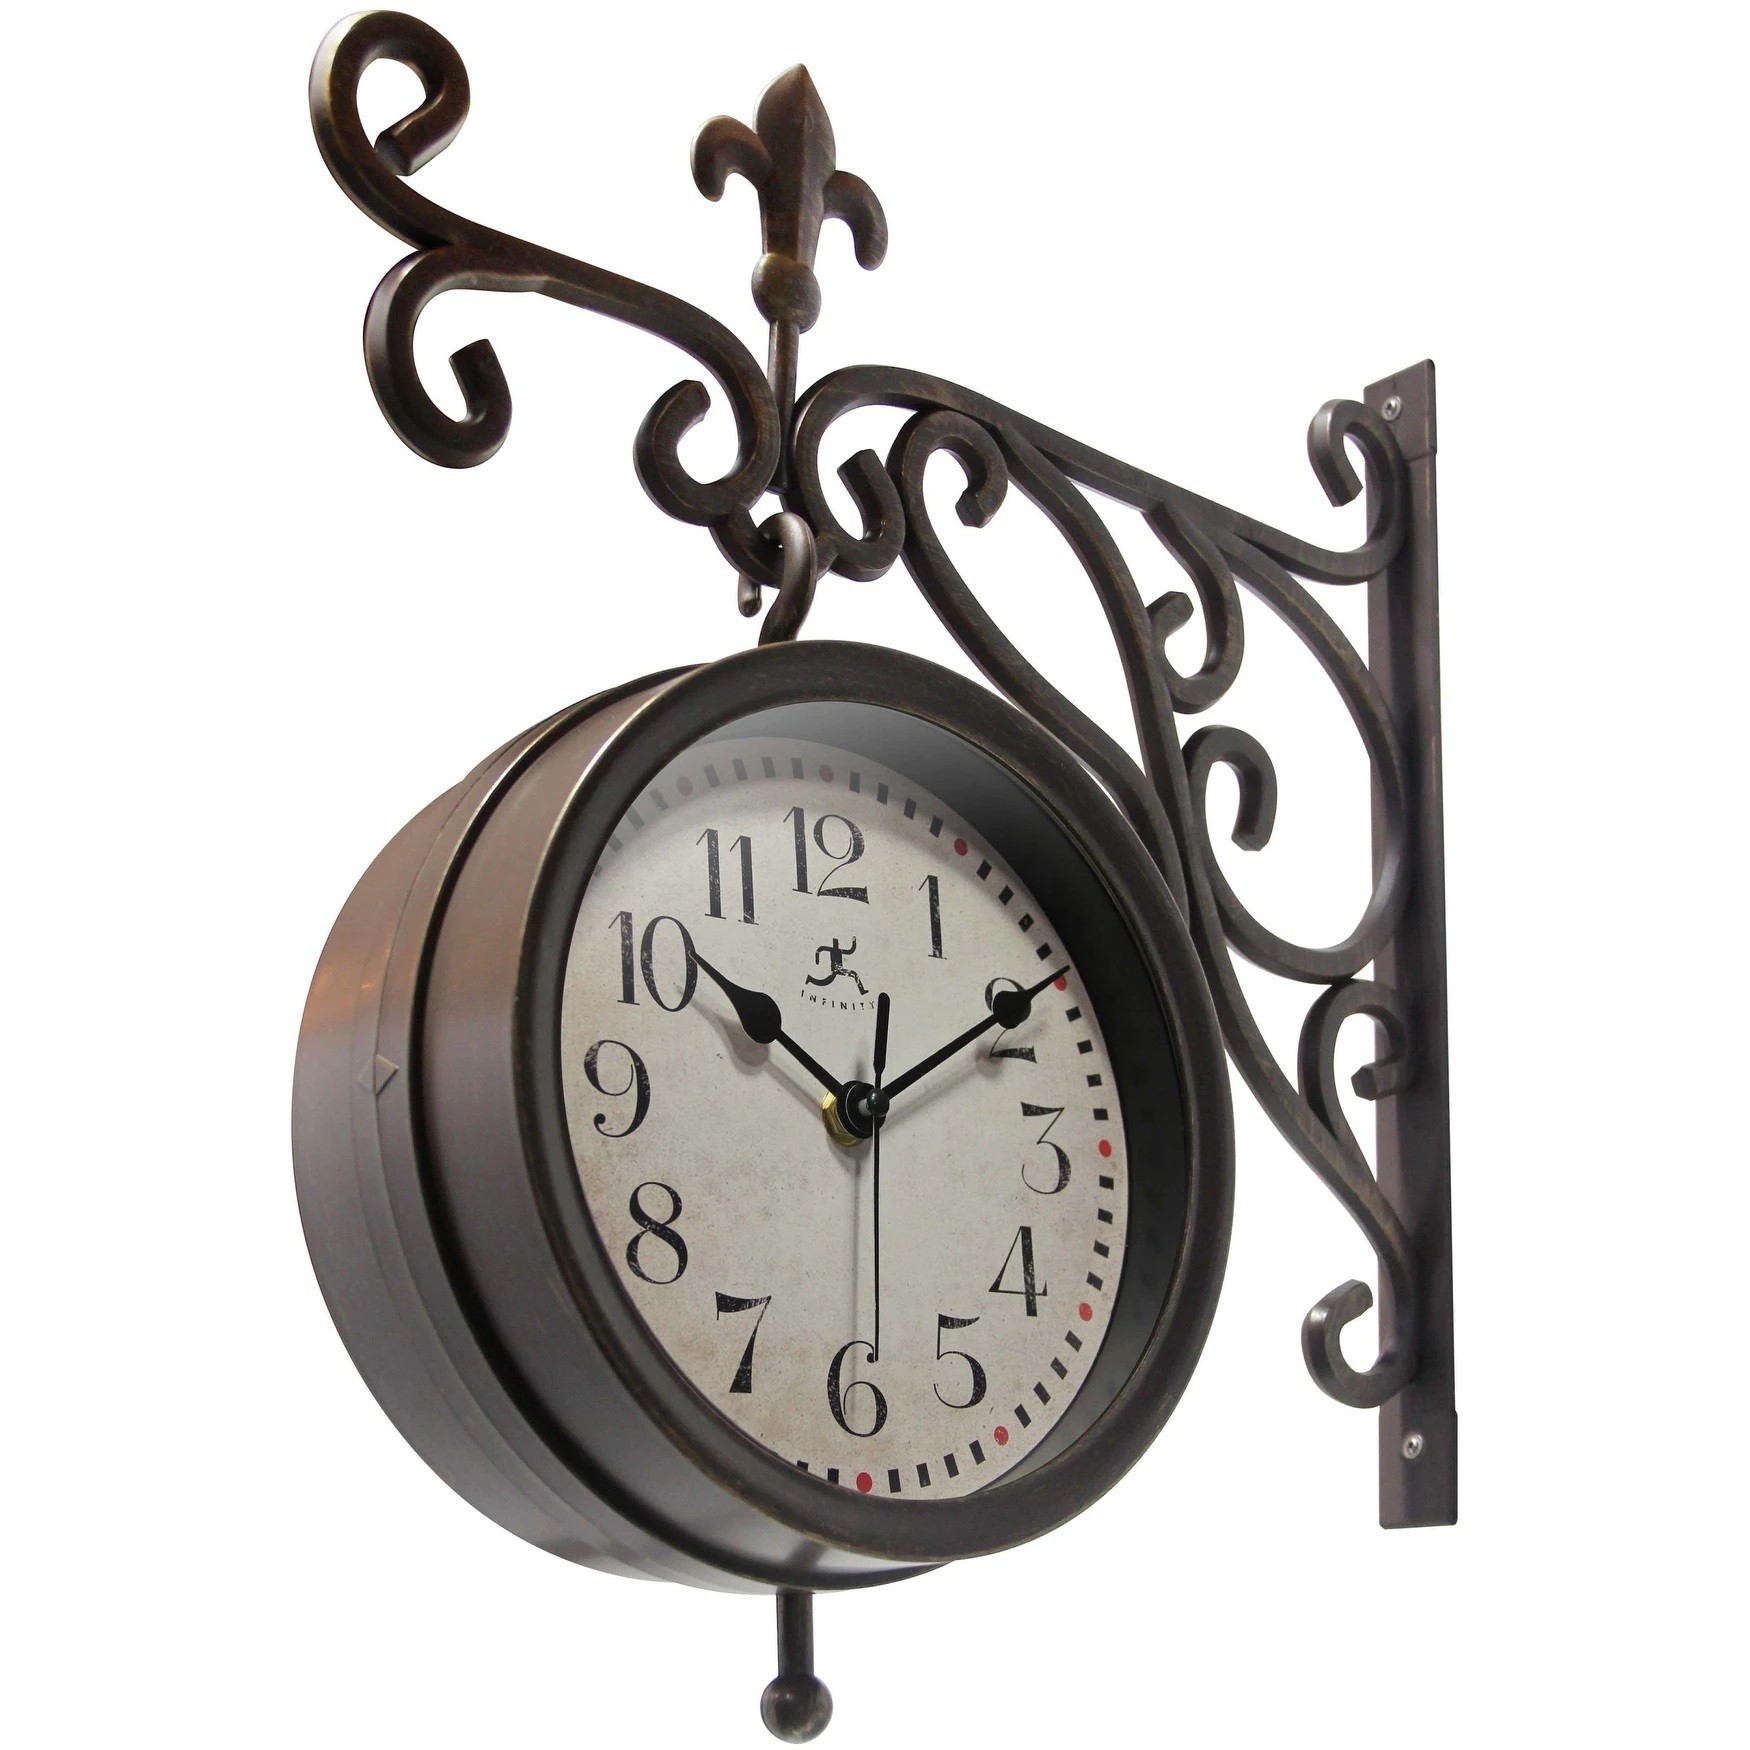 Double Sided Bracket Wall Clock Thermometer Humidity Outdoor Garden Station NEW 